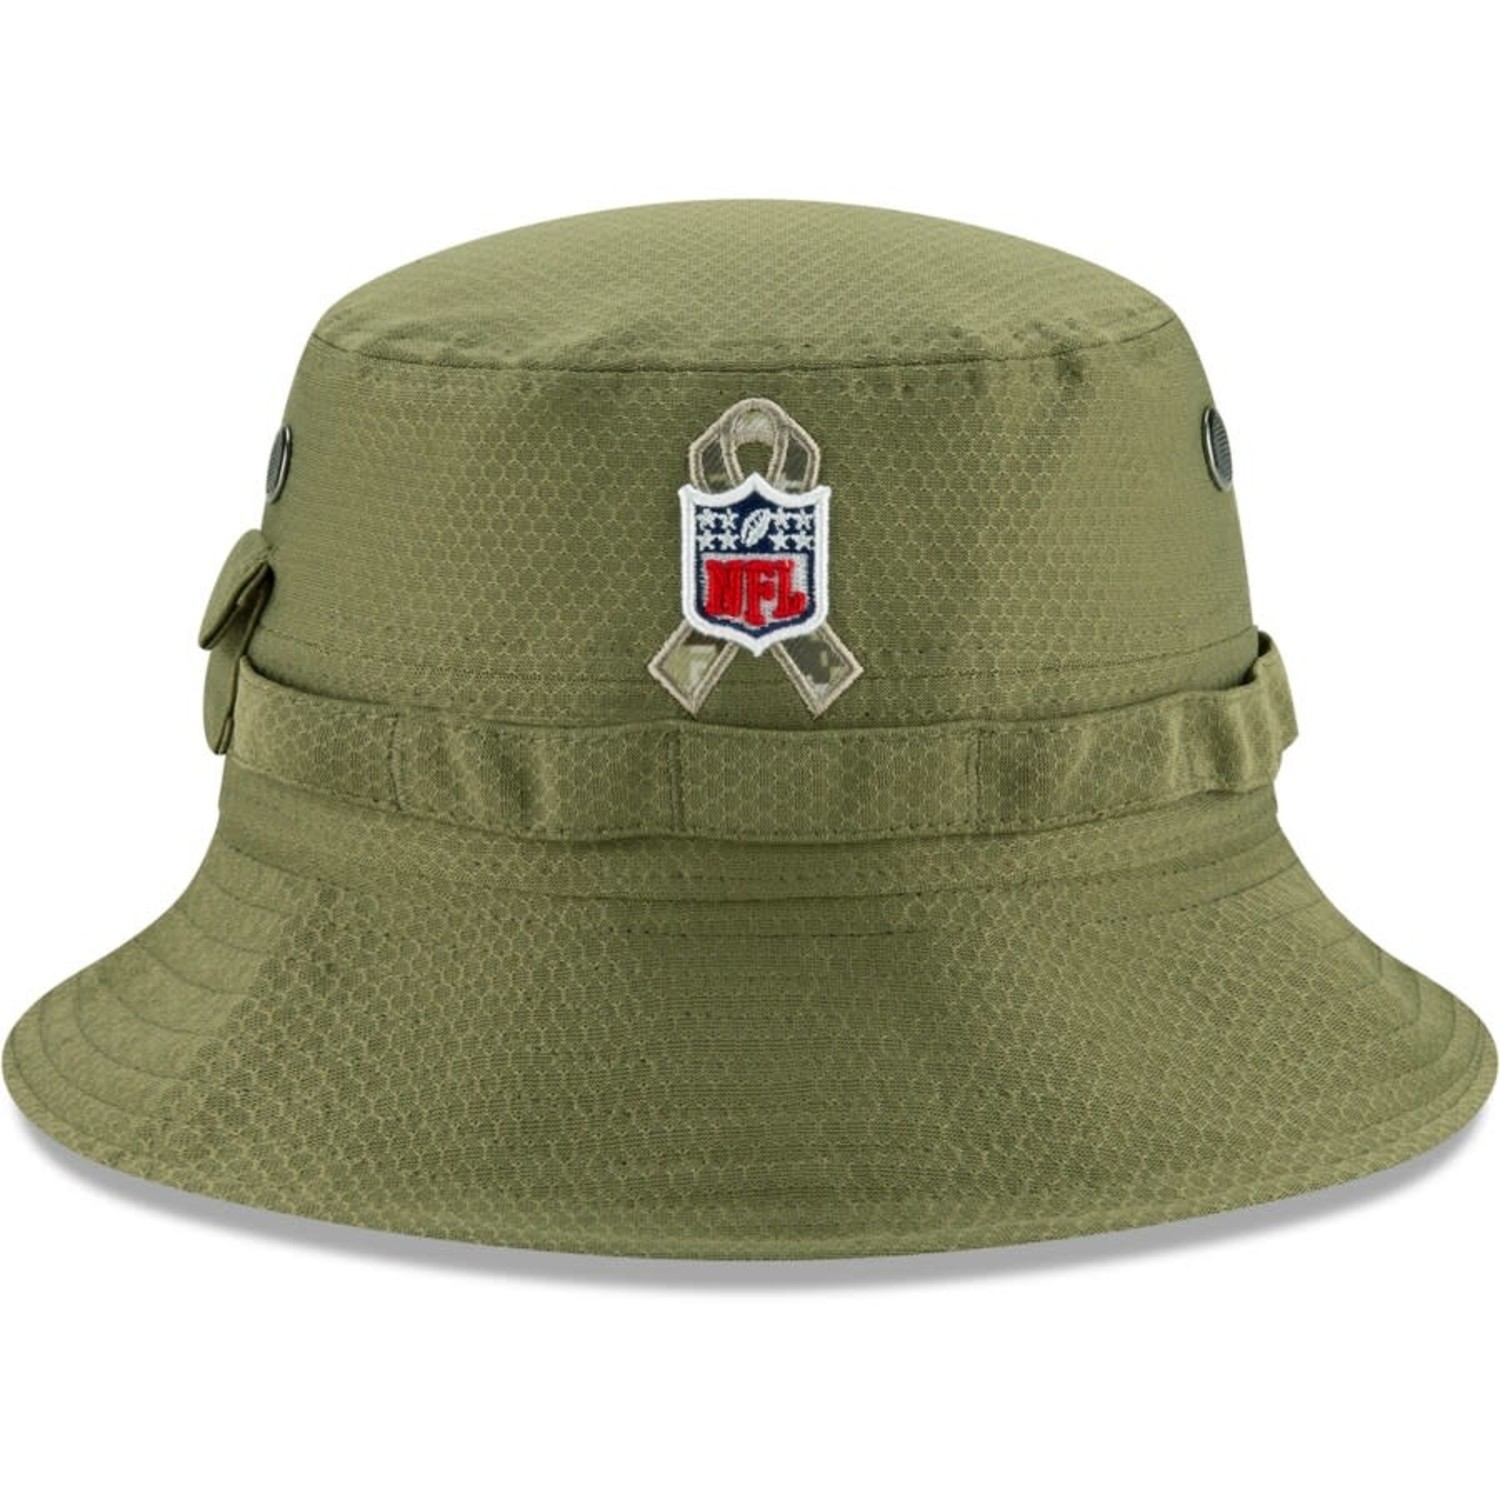 Shop the NFL's 2019 Salute to Service Collection